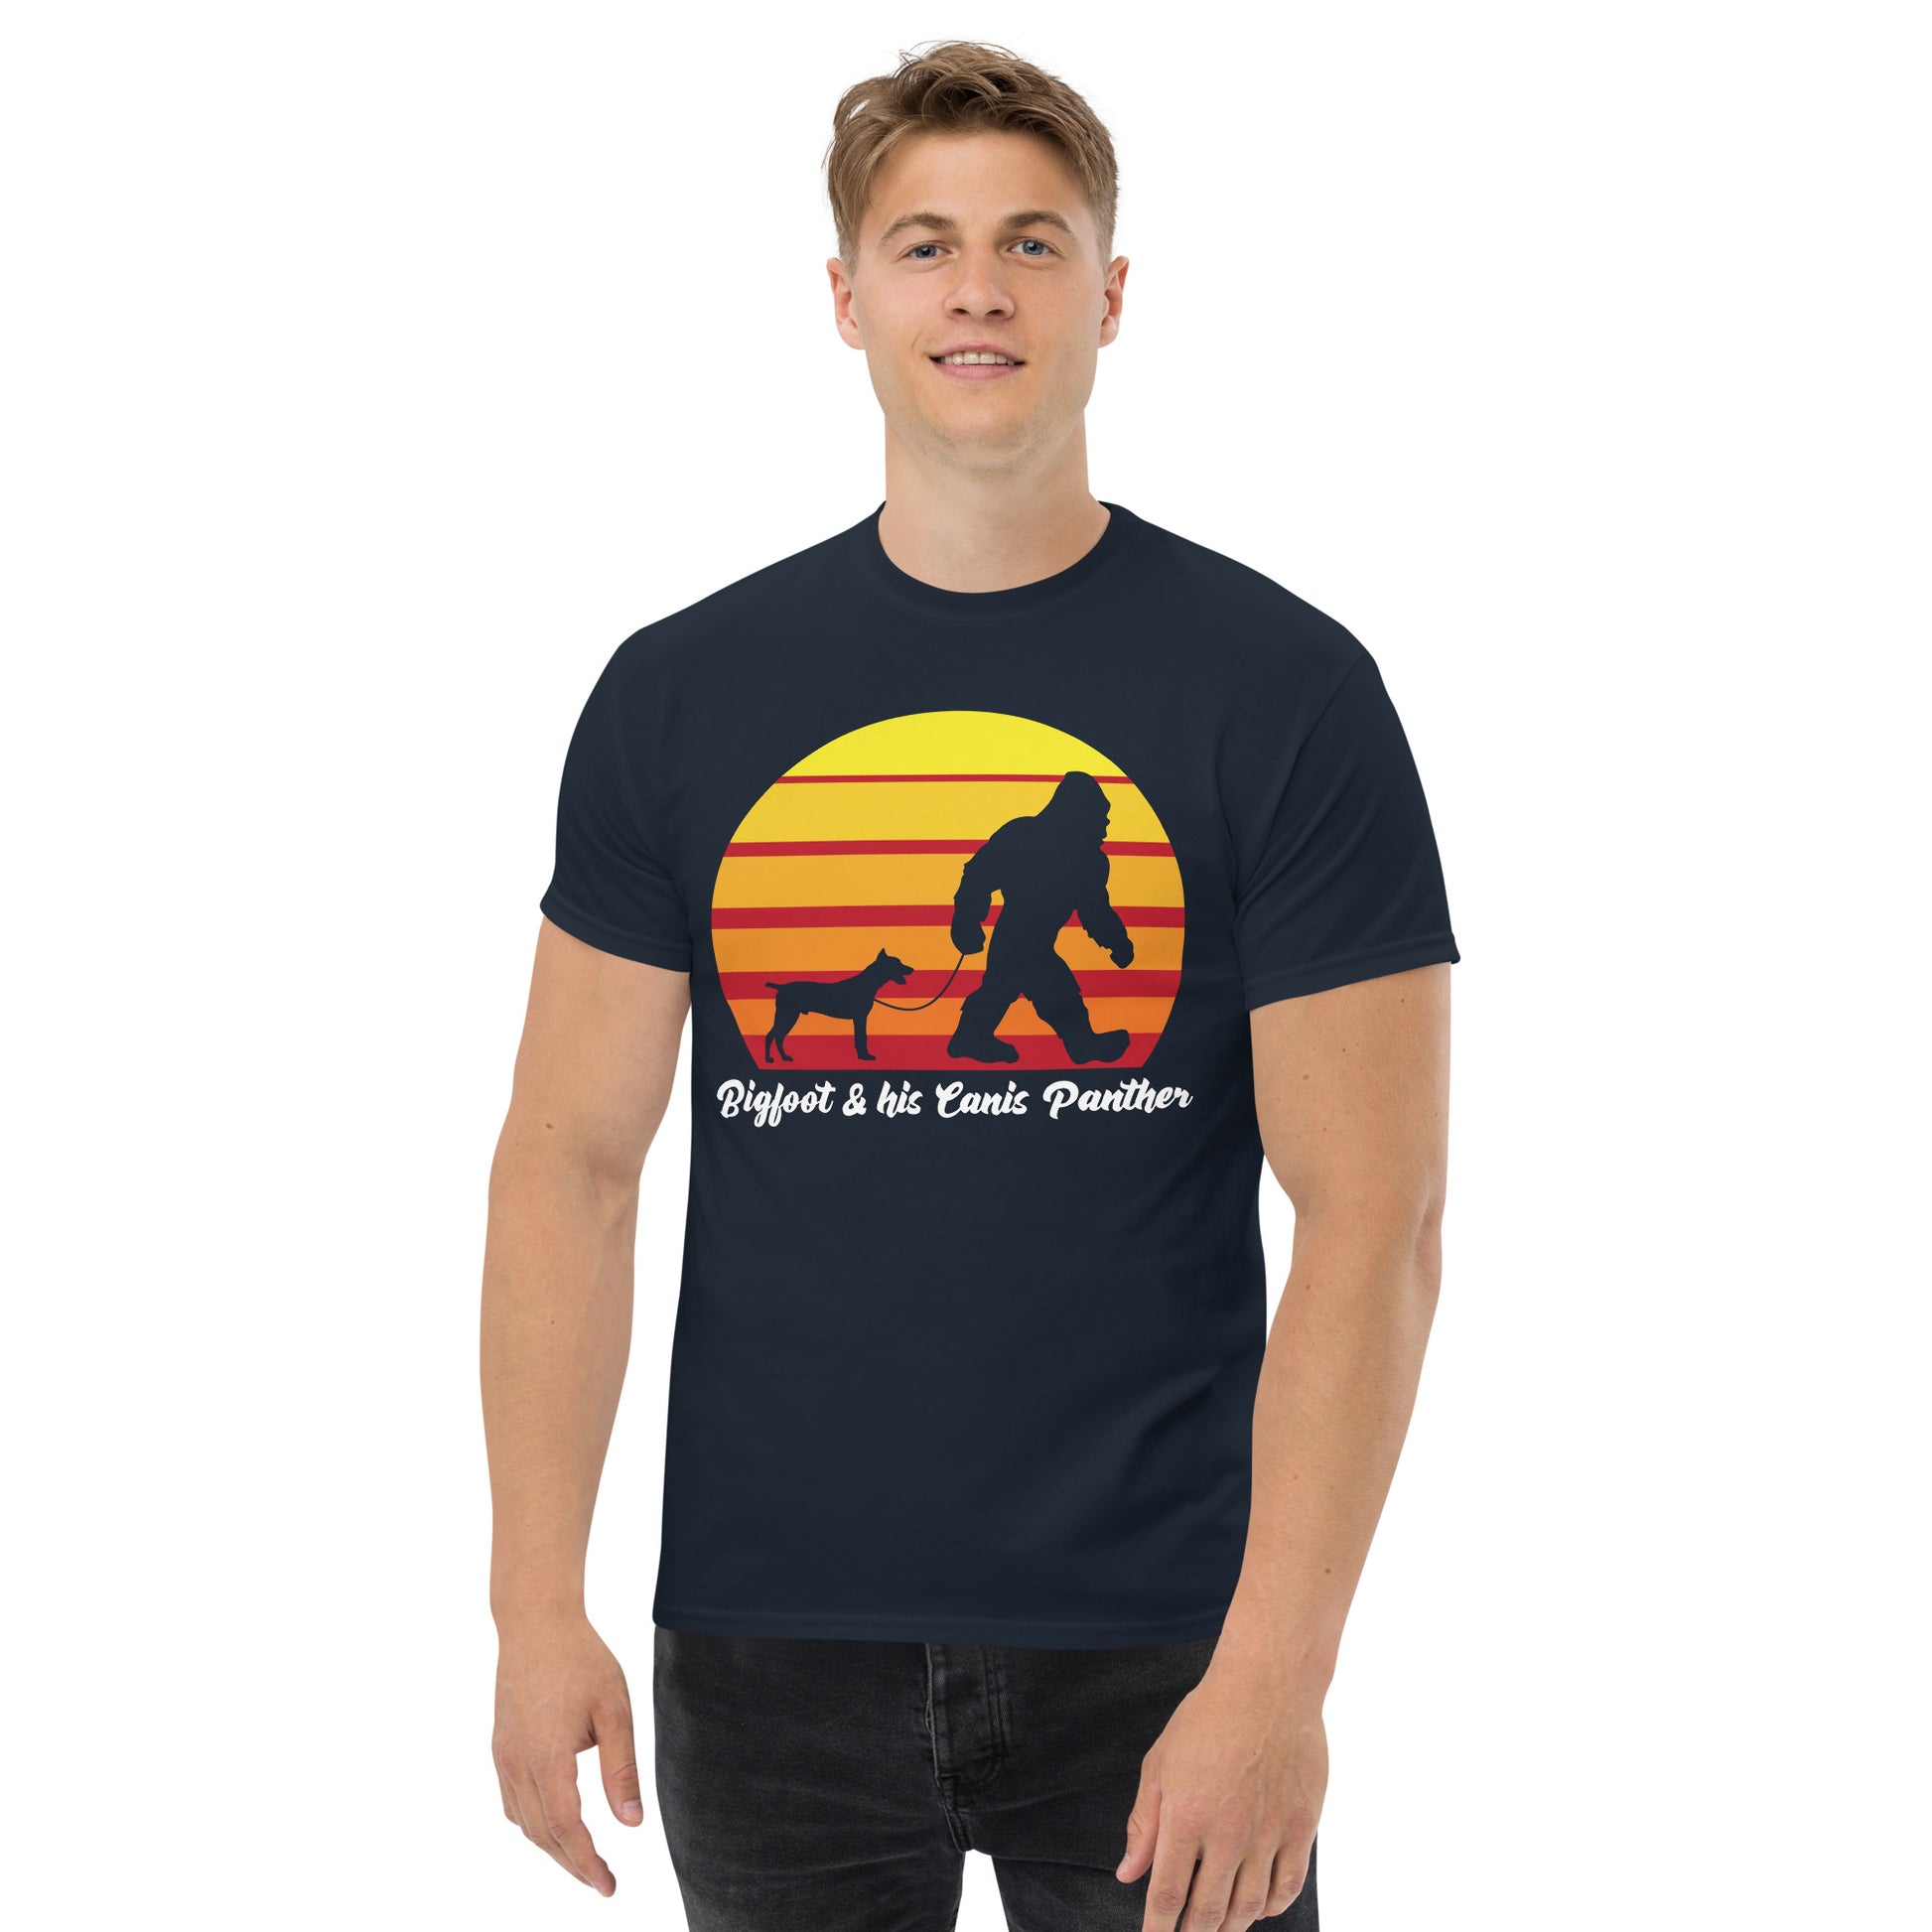 Big foot and his Canis Panther men’s navy t-shirt by Dog Artistry.